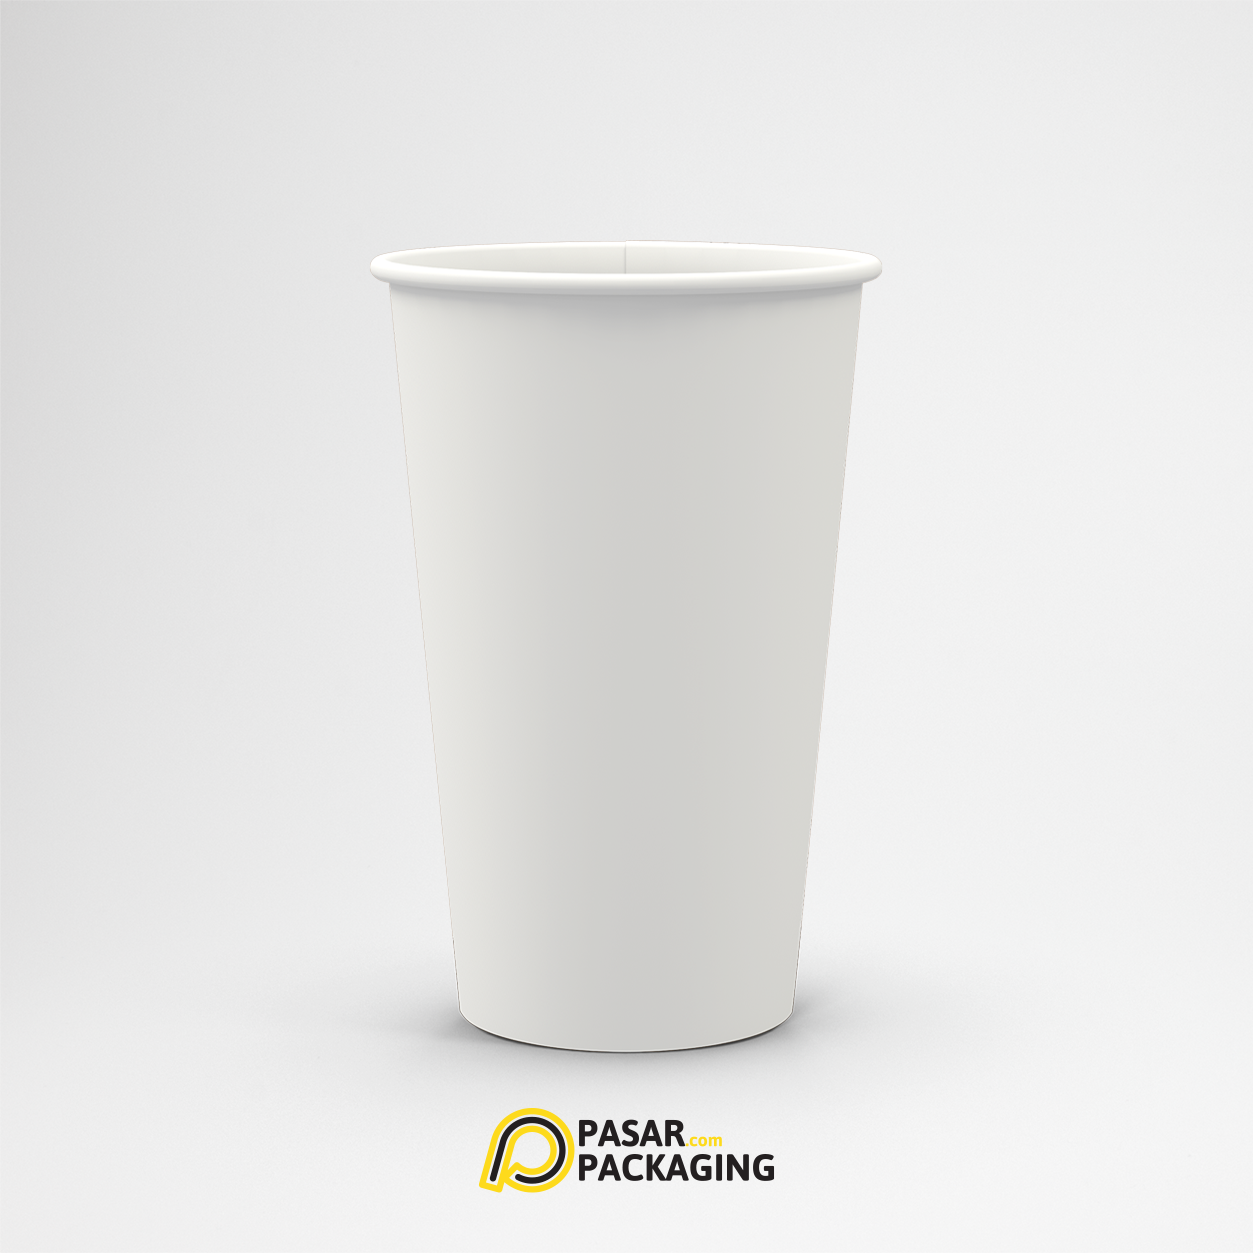 22oz Hot Paper Cup - Pasar Packaging